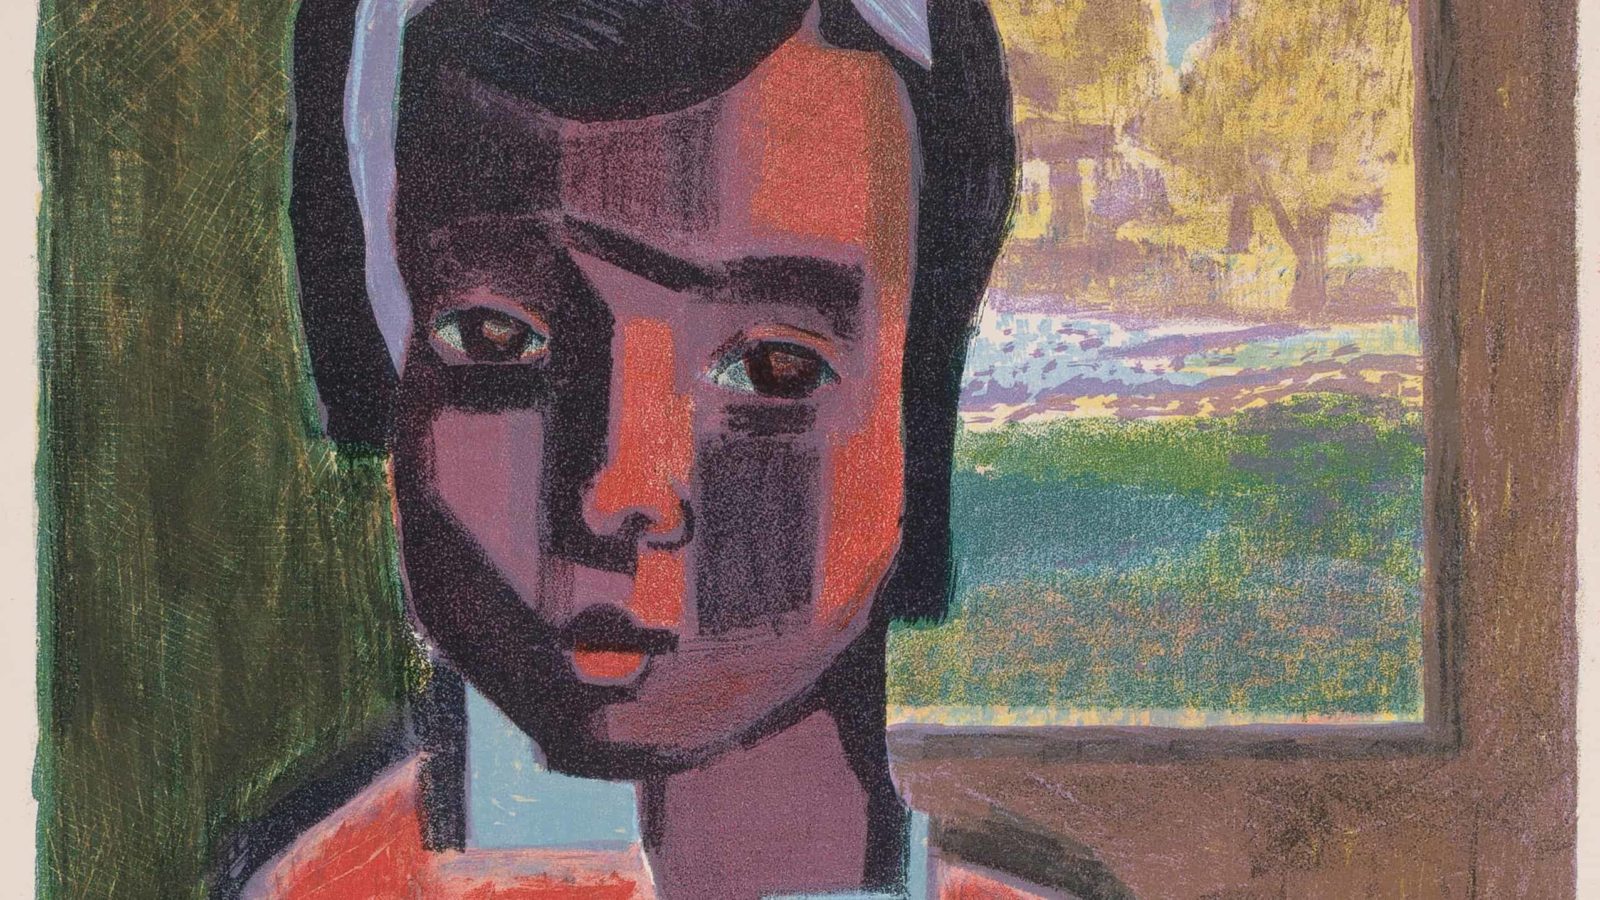 Artist and Master Printer Robert Blackburn's abstract print Girl in Red appears in a celebration of his life and work at the Hyde Collection in Glens Falls, N.Y.